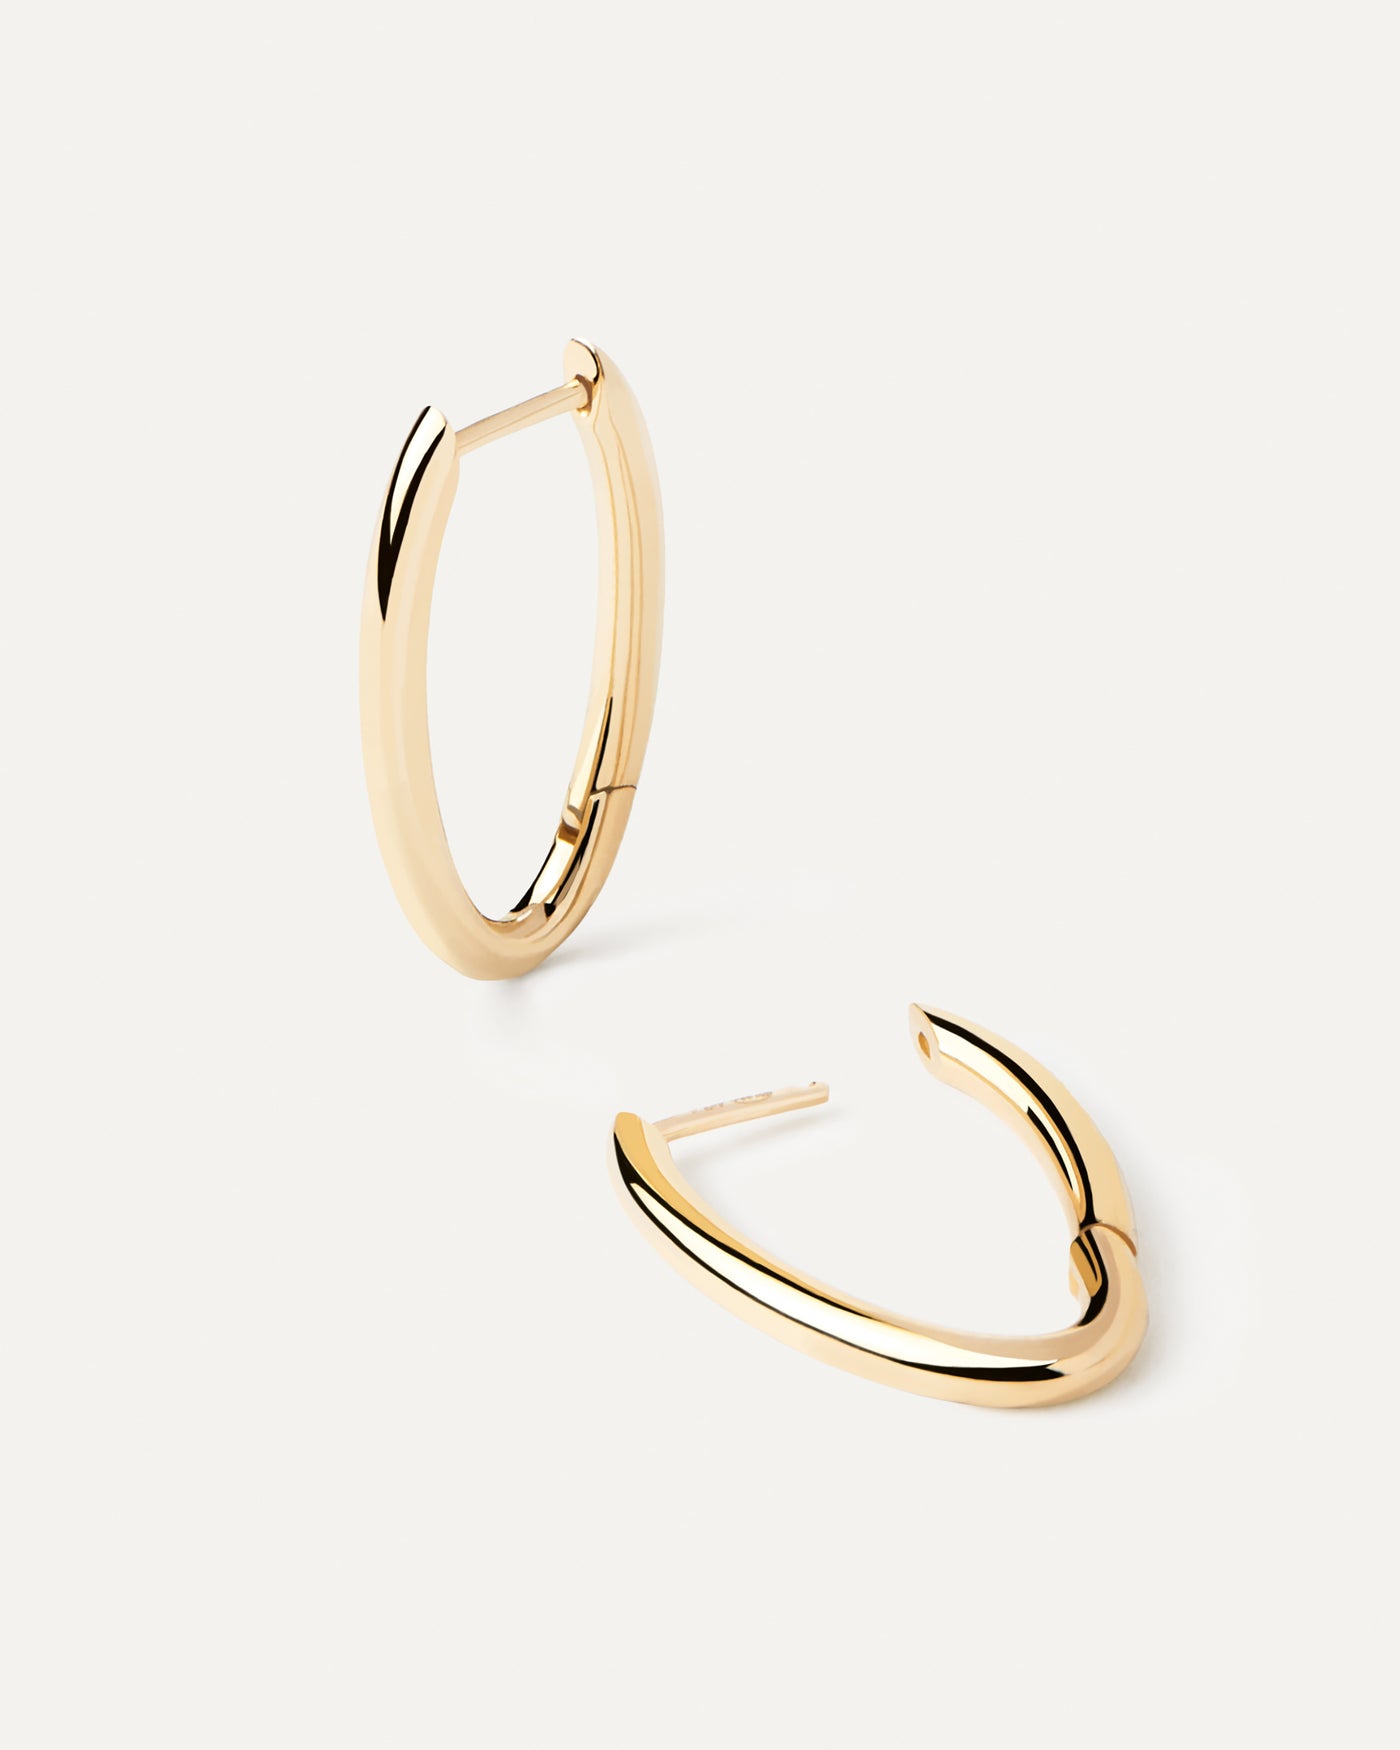 2023 Selection | Gold Vera Hoops. Distinctive oval shape hoop earrings in solid yellow gold. Get the latest arrival from PDPAOLA. Place your order safely and get this Best Seller. Free Shipping.